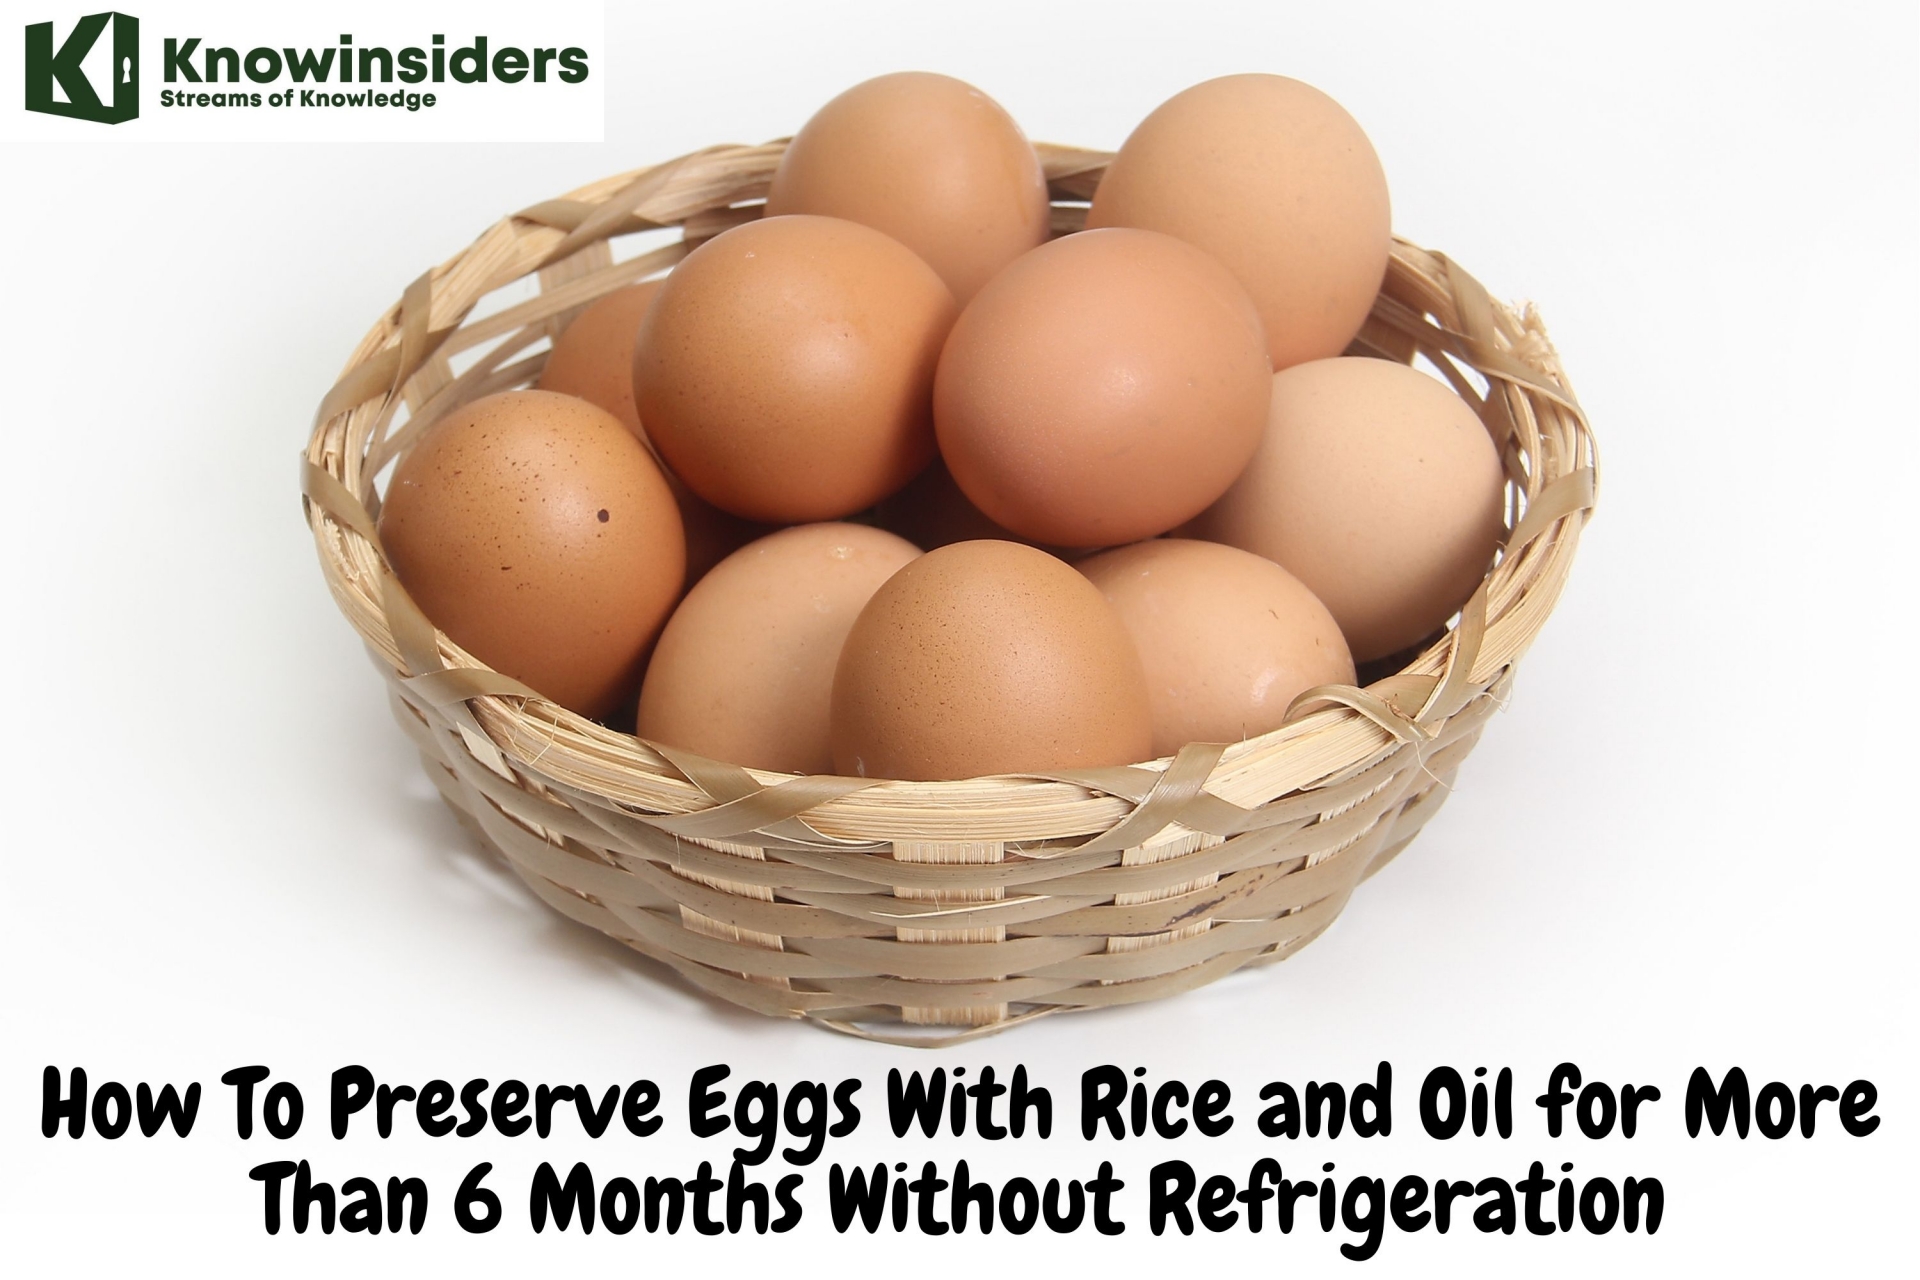 How To Preserve Eggs With Rice and Oil for More Than 6 Months Without Refrigeration